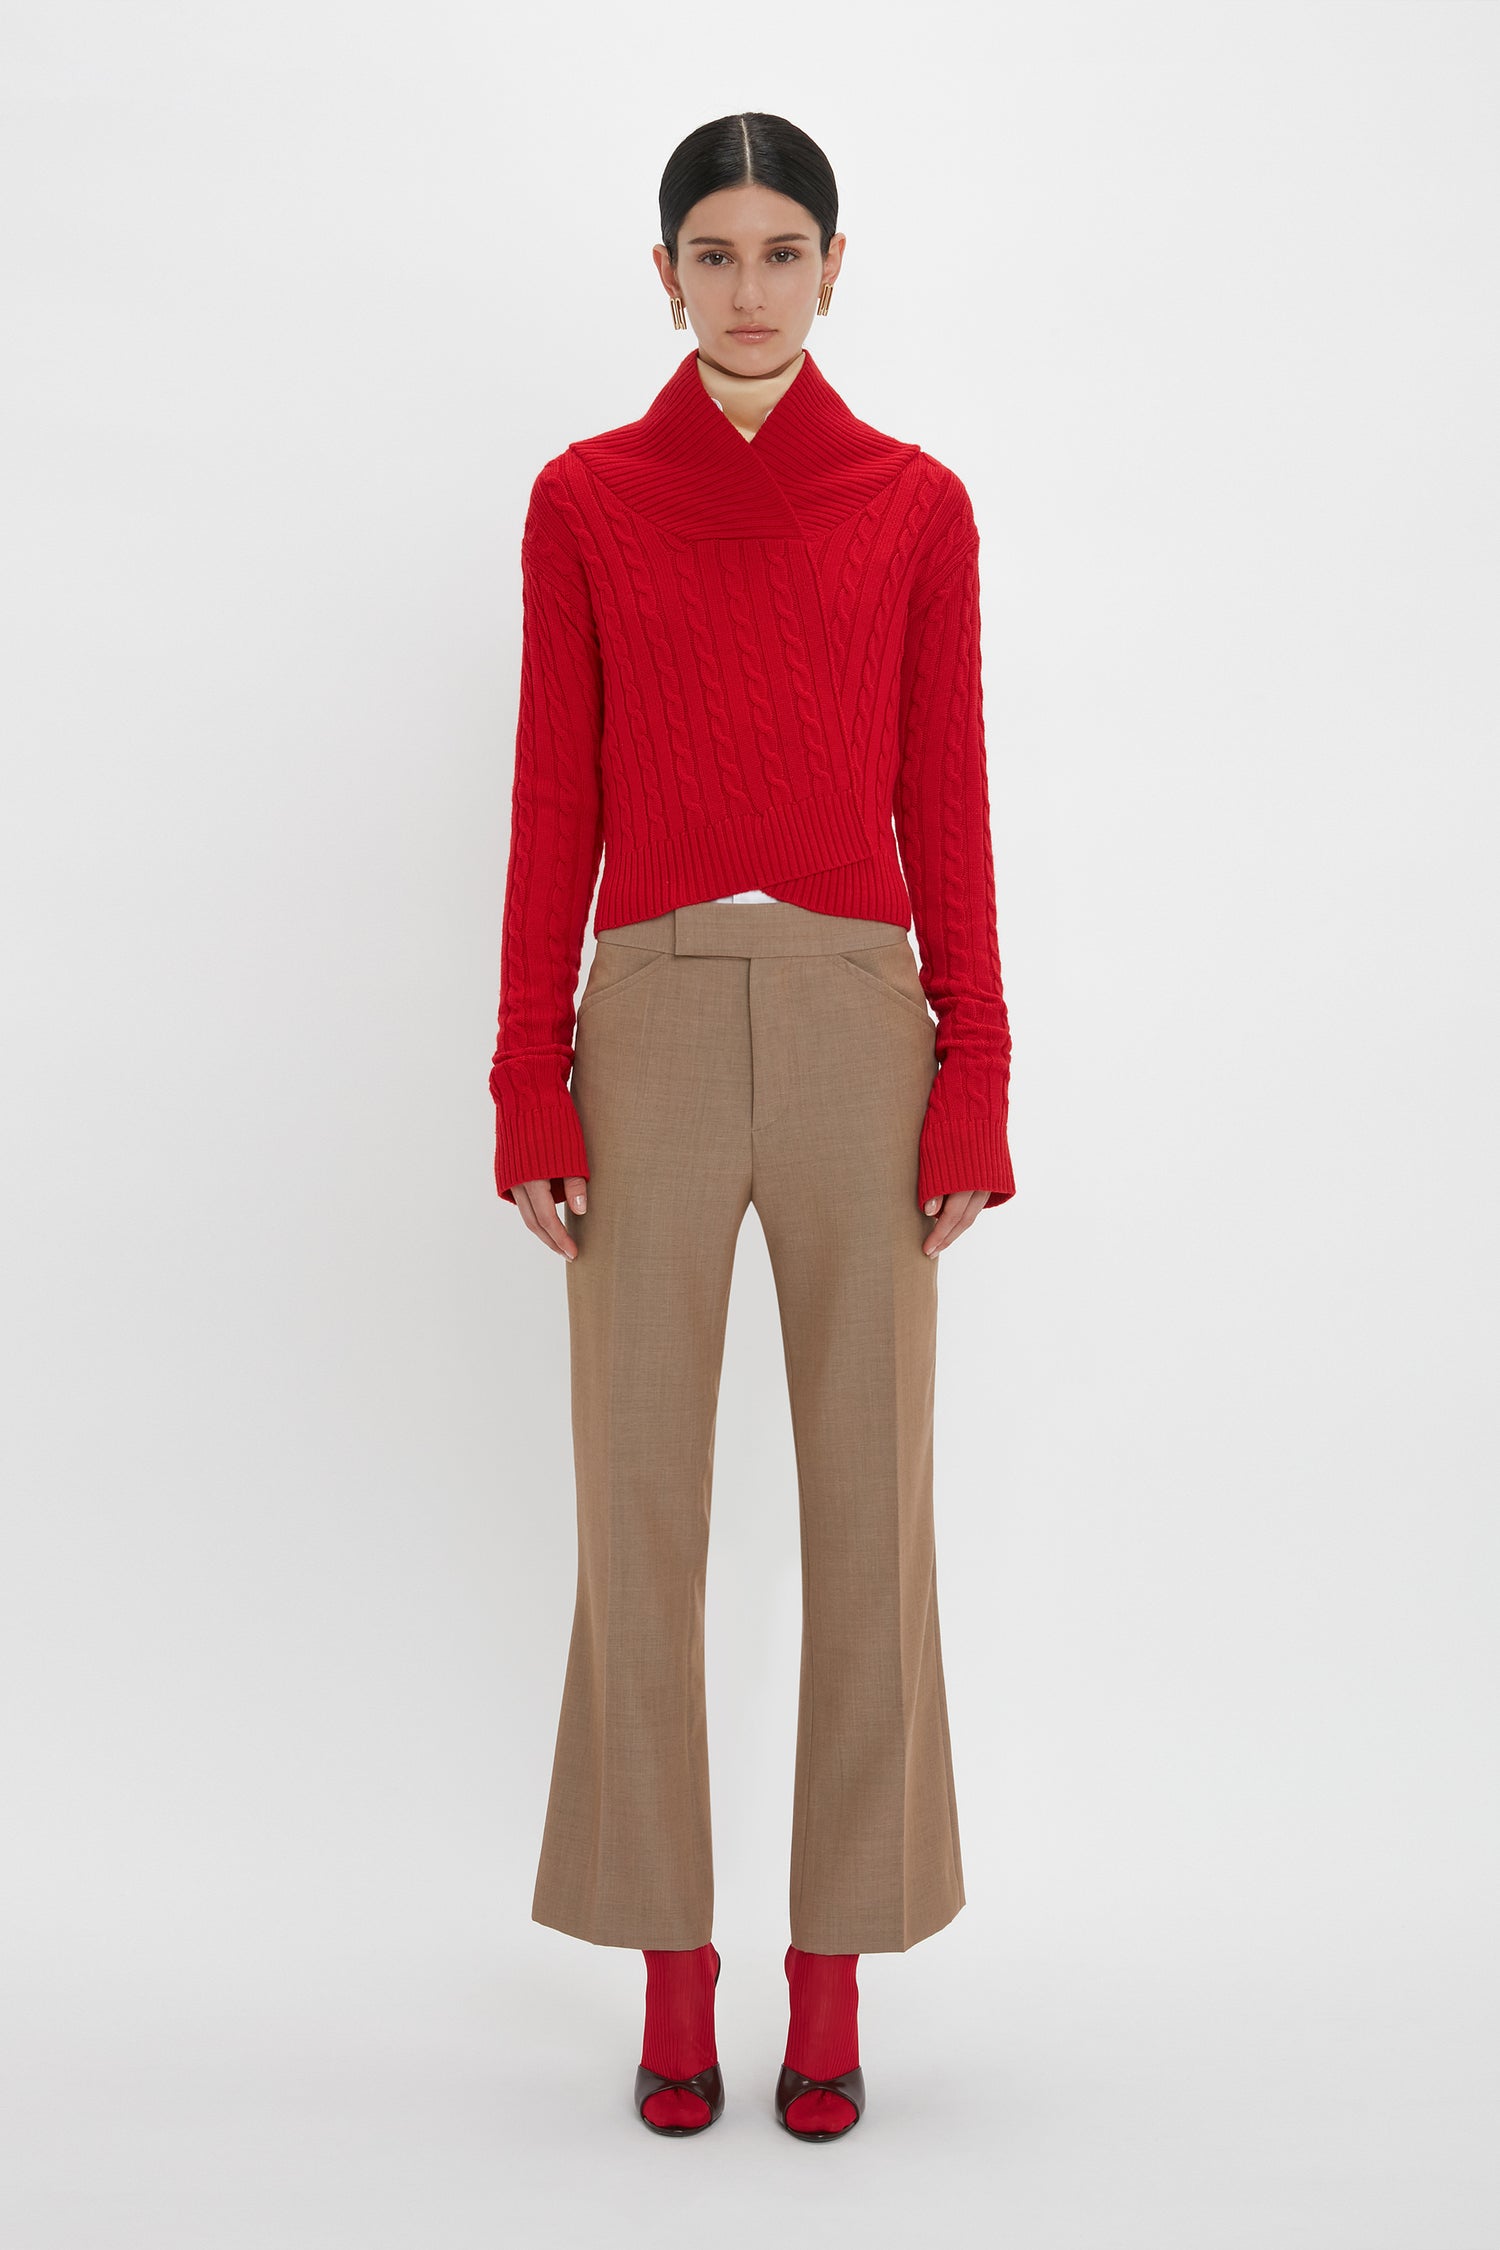 Person wearing a Wrap Detail Jumper In Red from the Victoria Beckham brand, tan pants, and red shoes stands against a plain white background.